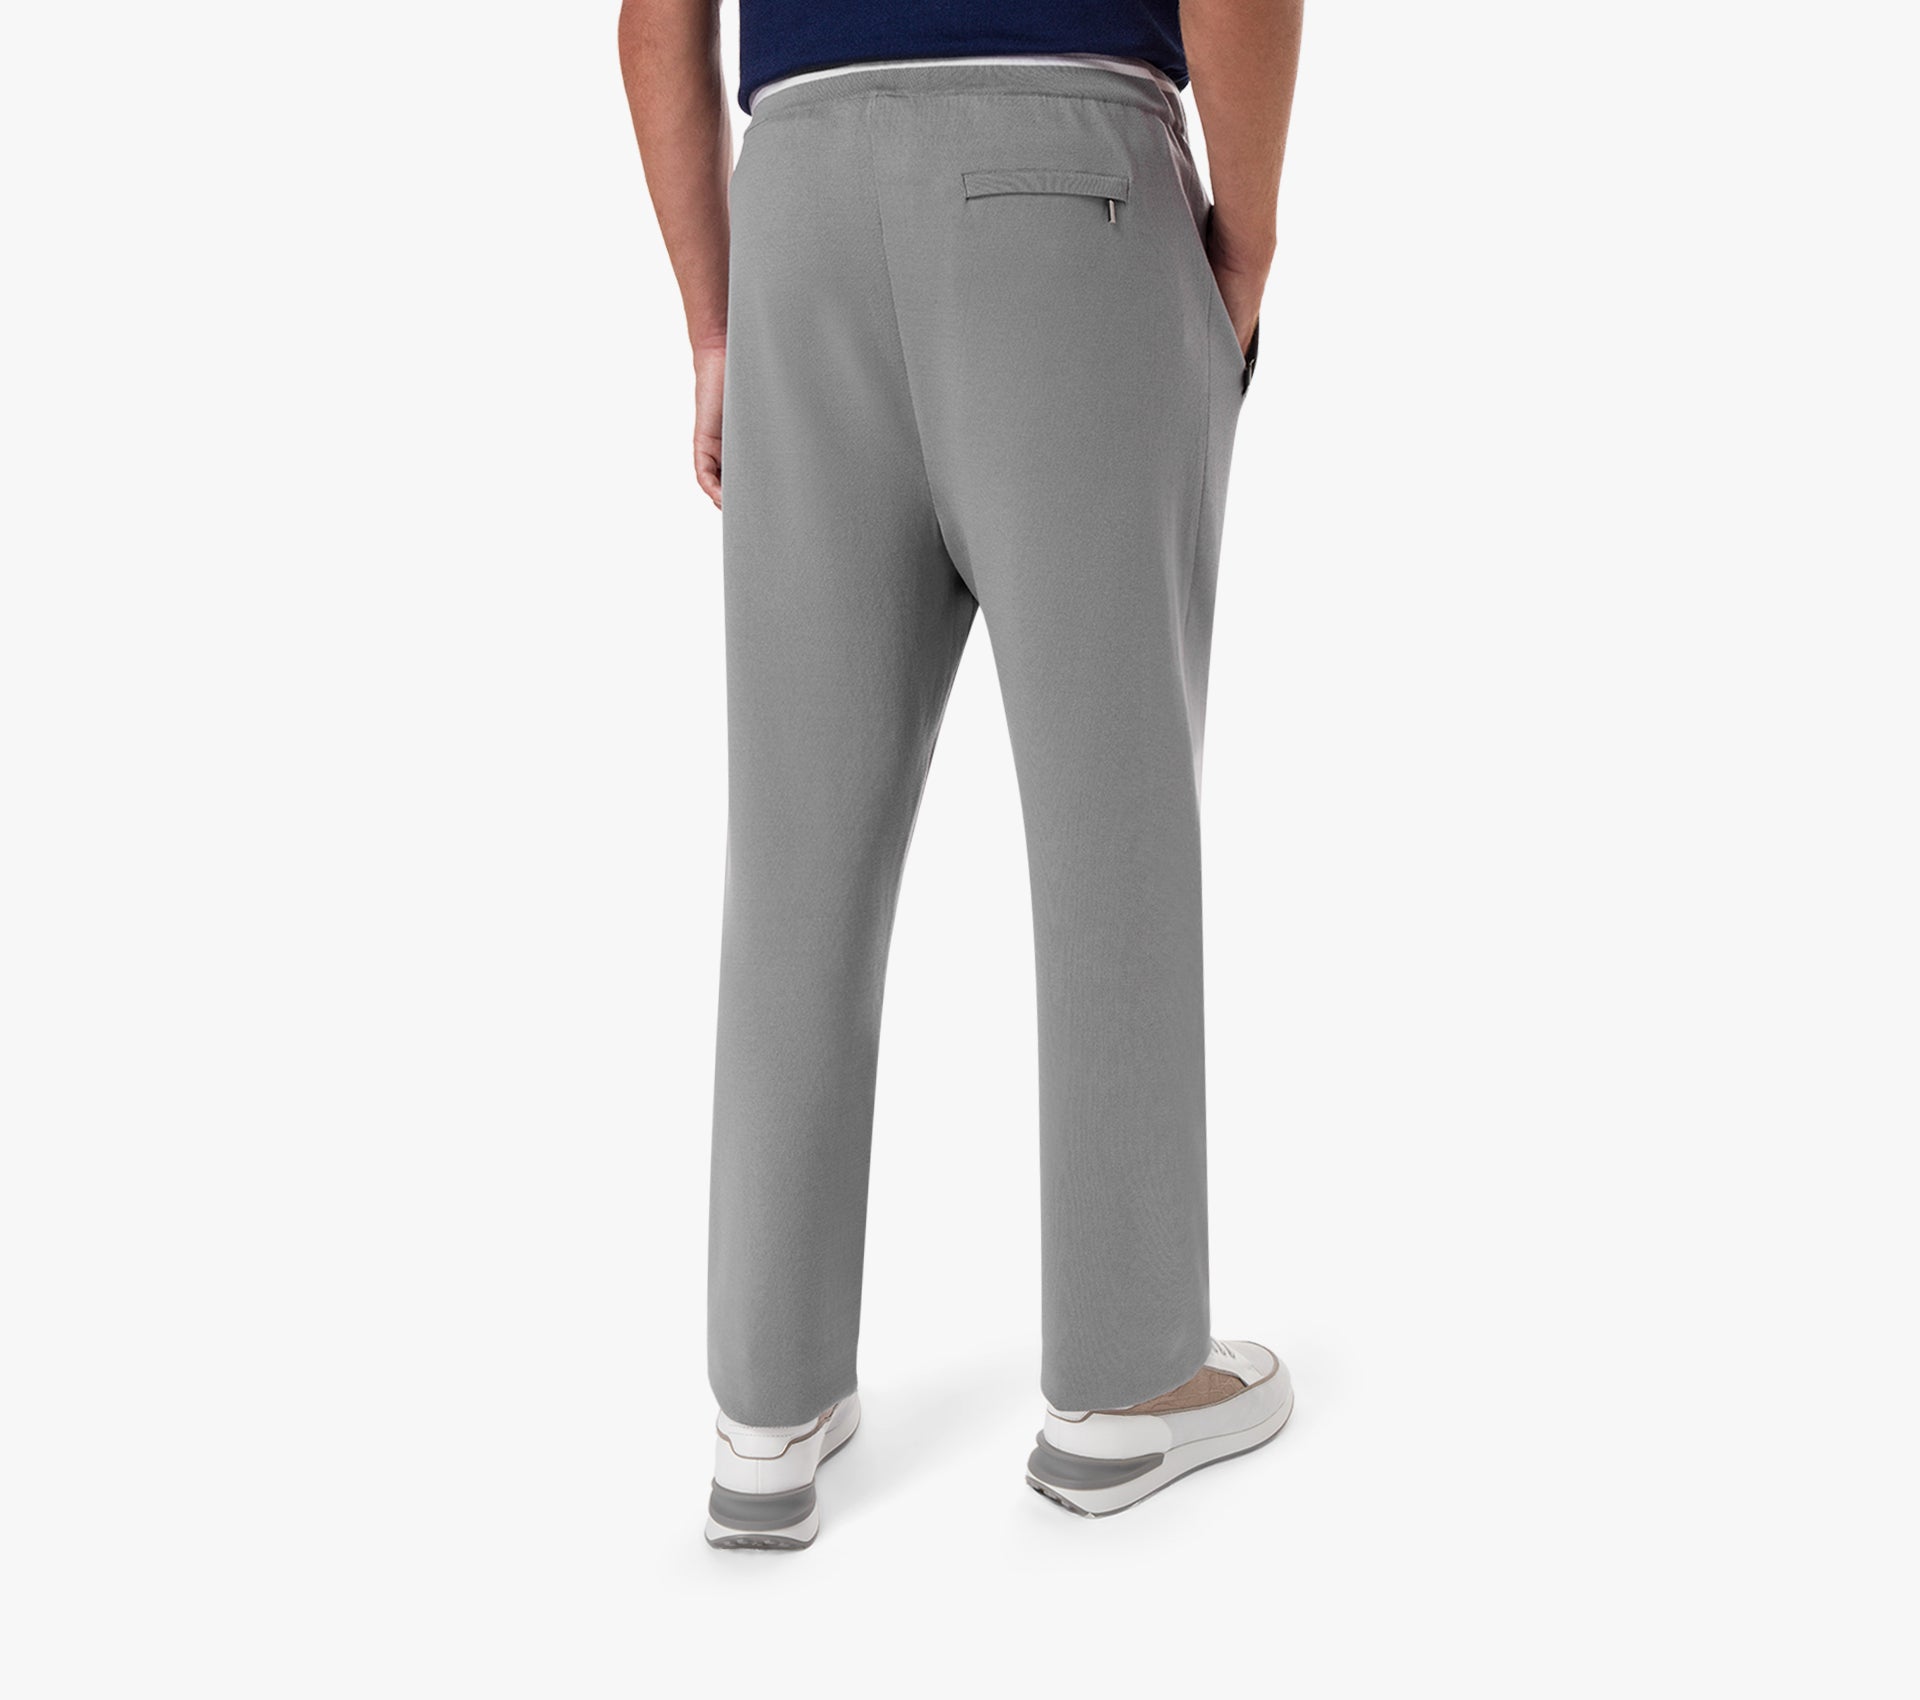 French Riviera Inspired Jogging-Style Trousers